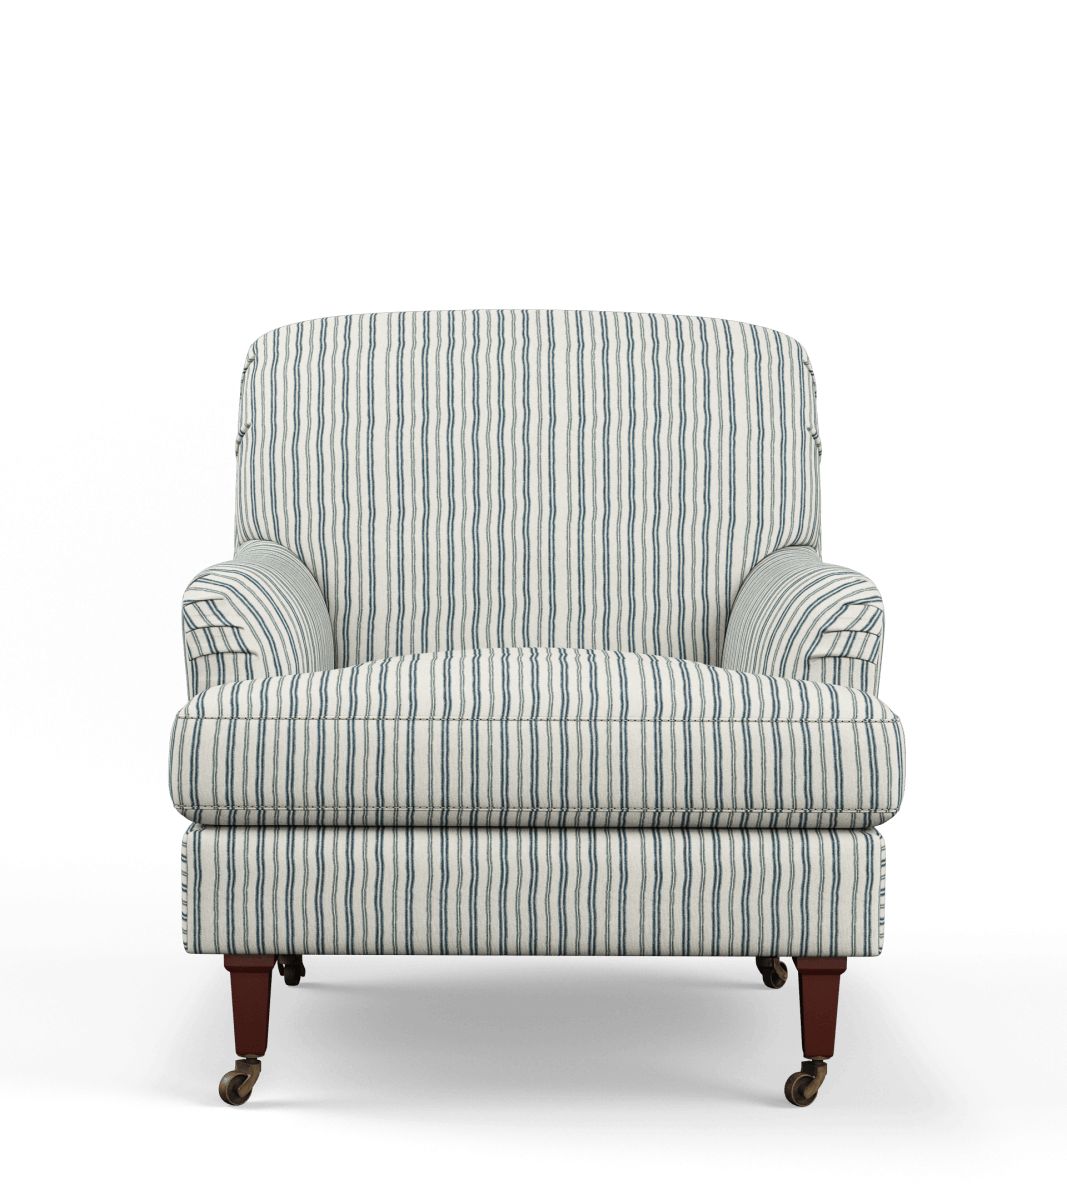 Large Coleridge Armchair with Linen Fixed Cover - Perfect Navy Ticking Stripe | OKA US